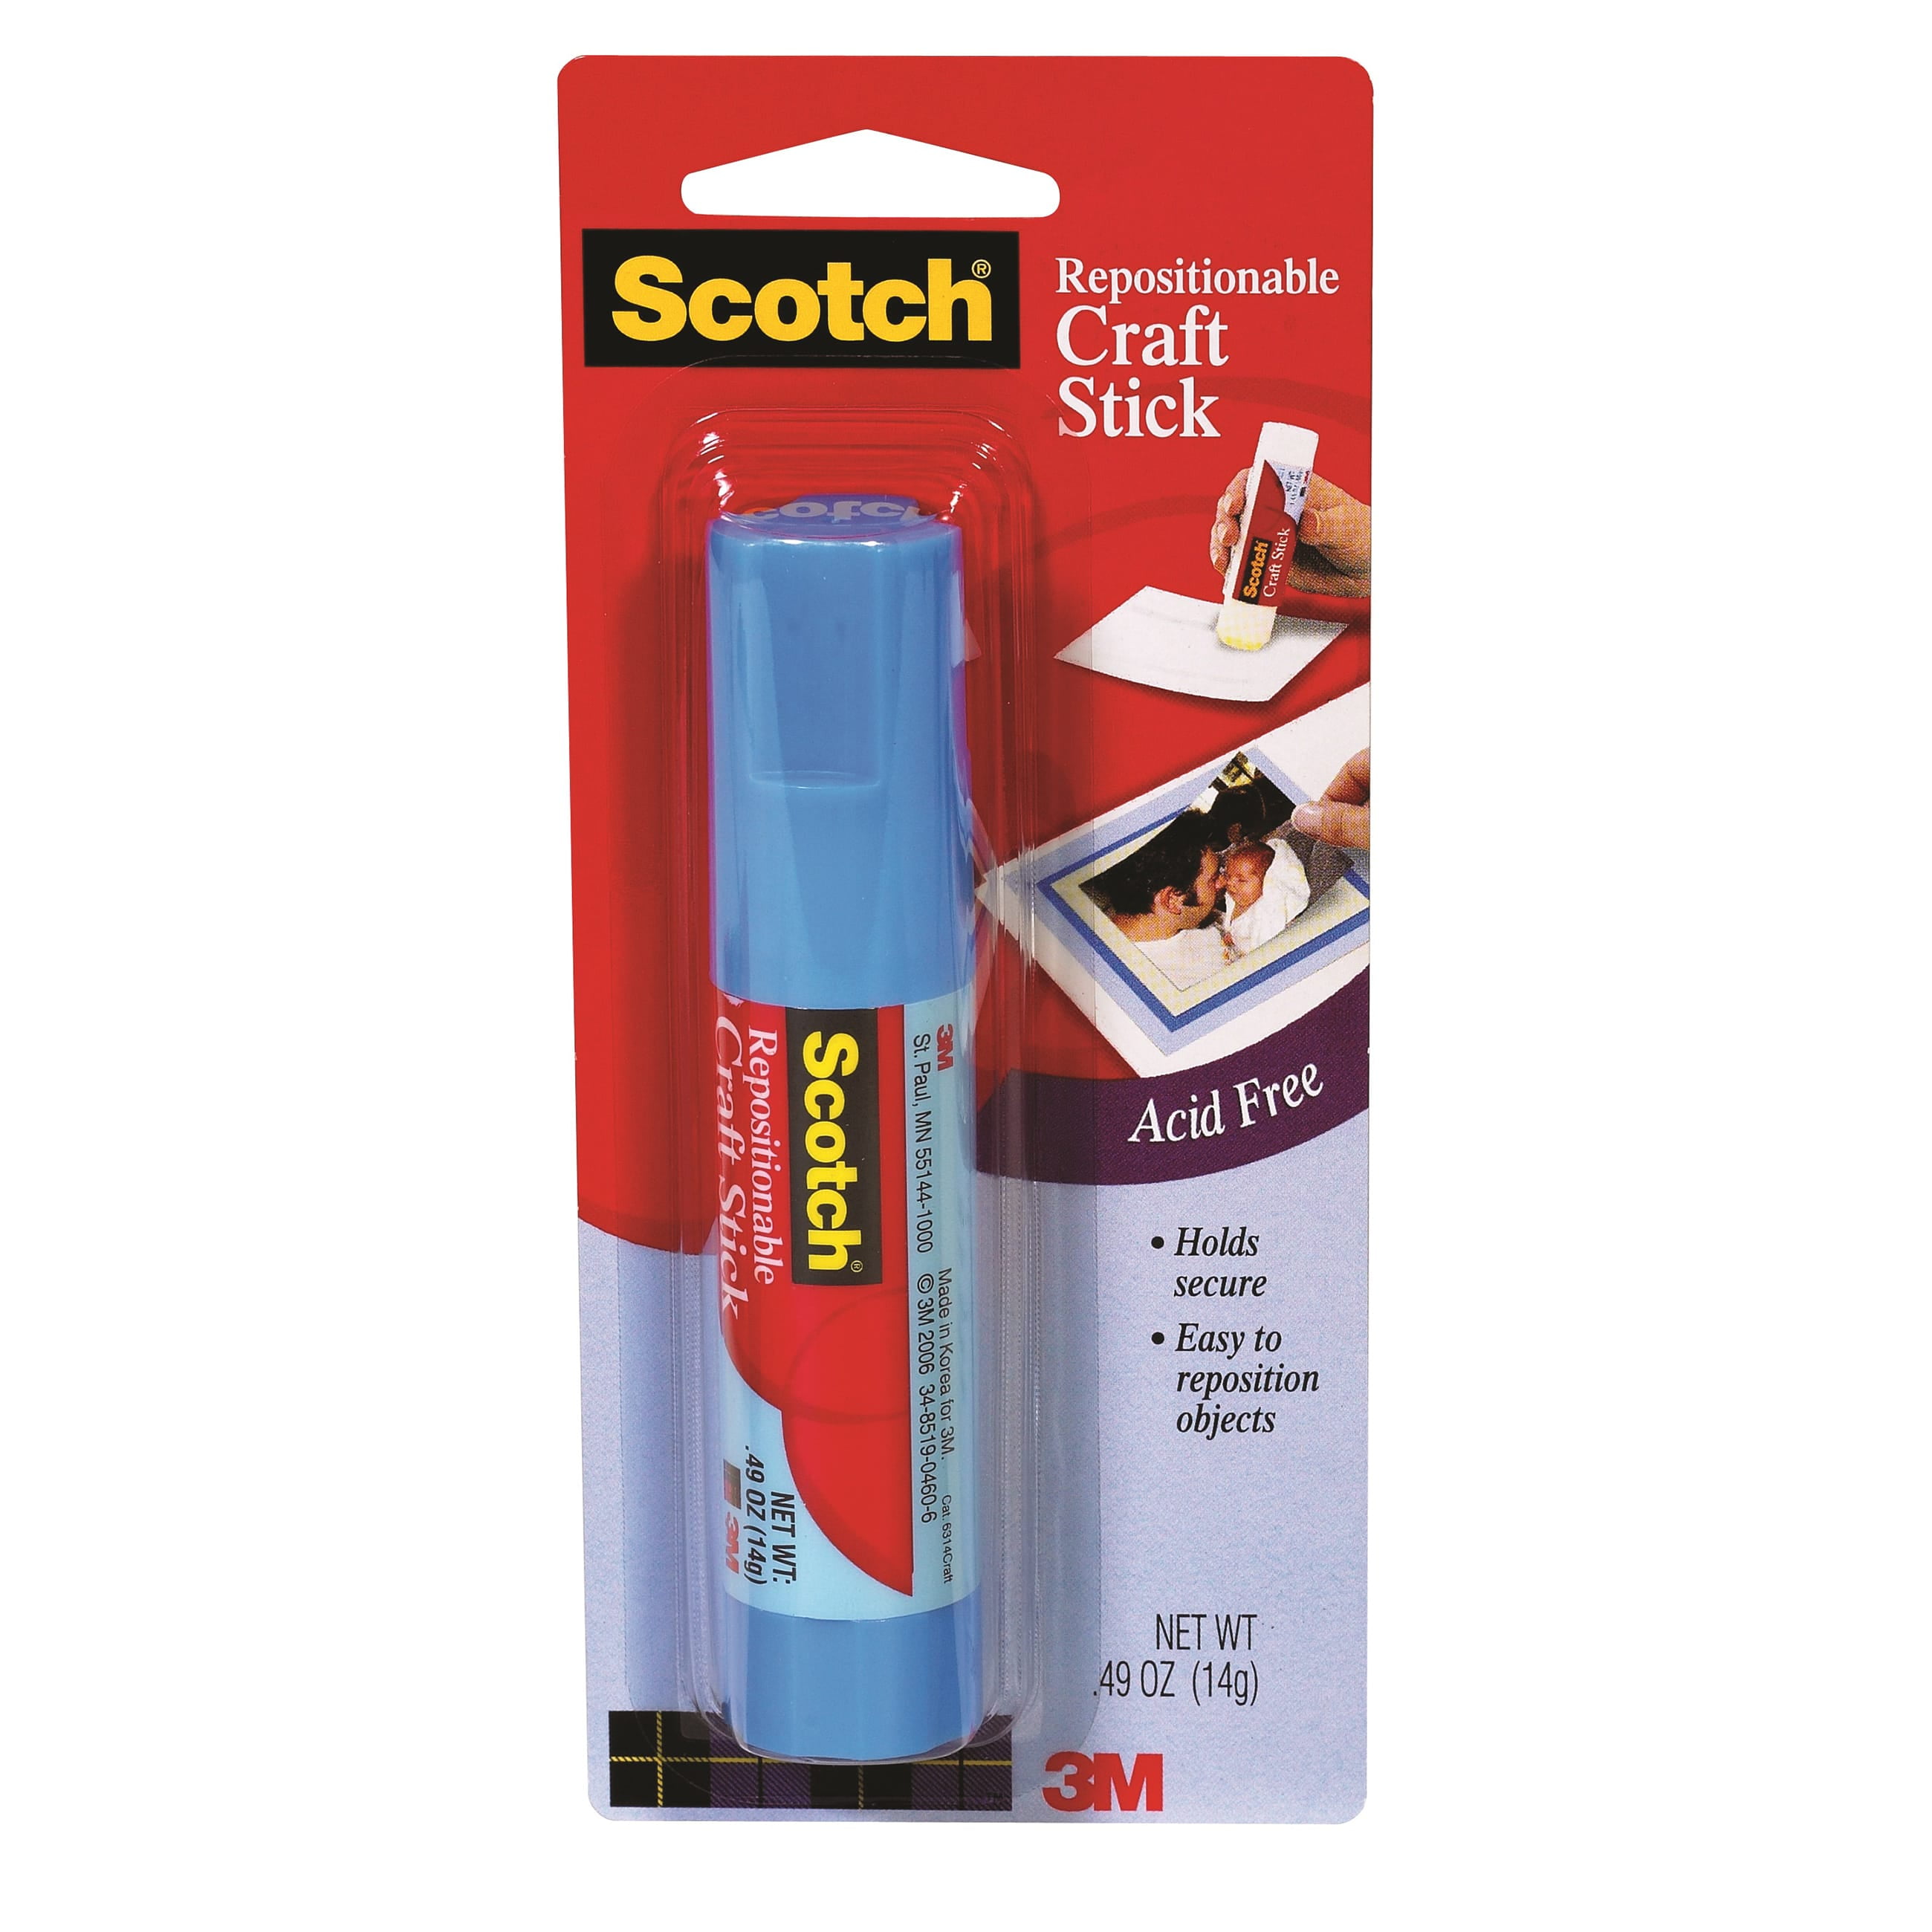  Scotch Repositionable Glue Stick, 0.49 oz, Acid Free and  Non-Toxic (6314-CFT) : Arts, Crafts & Sewing